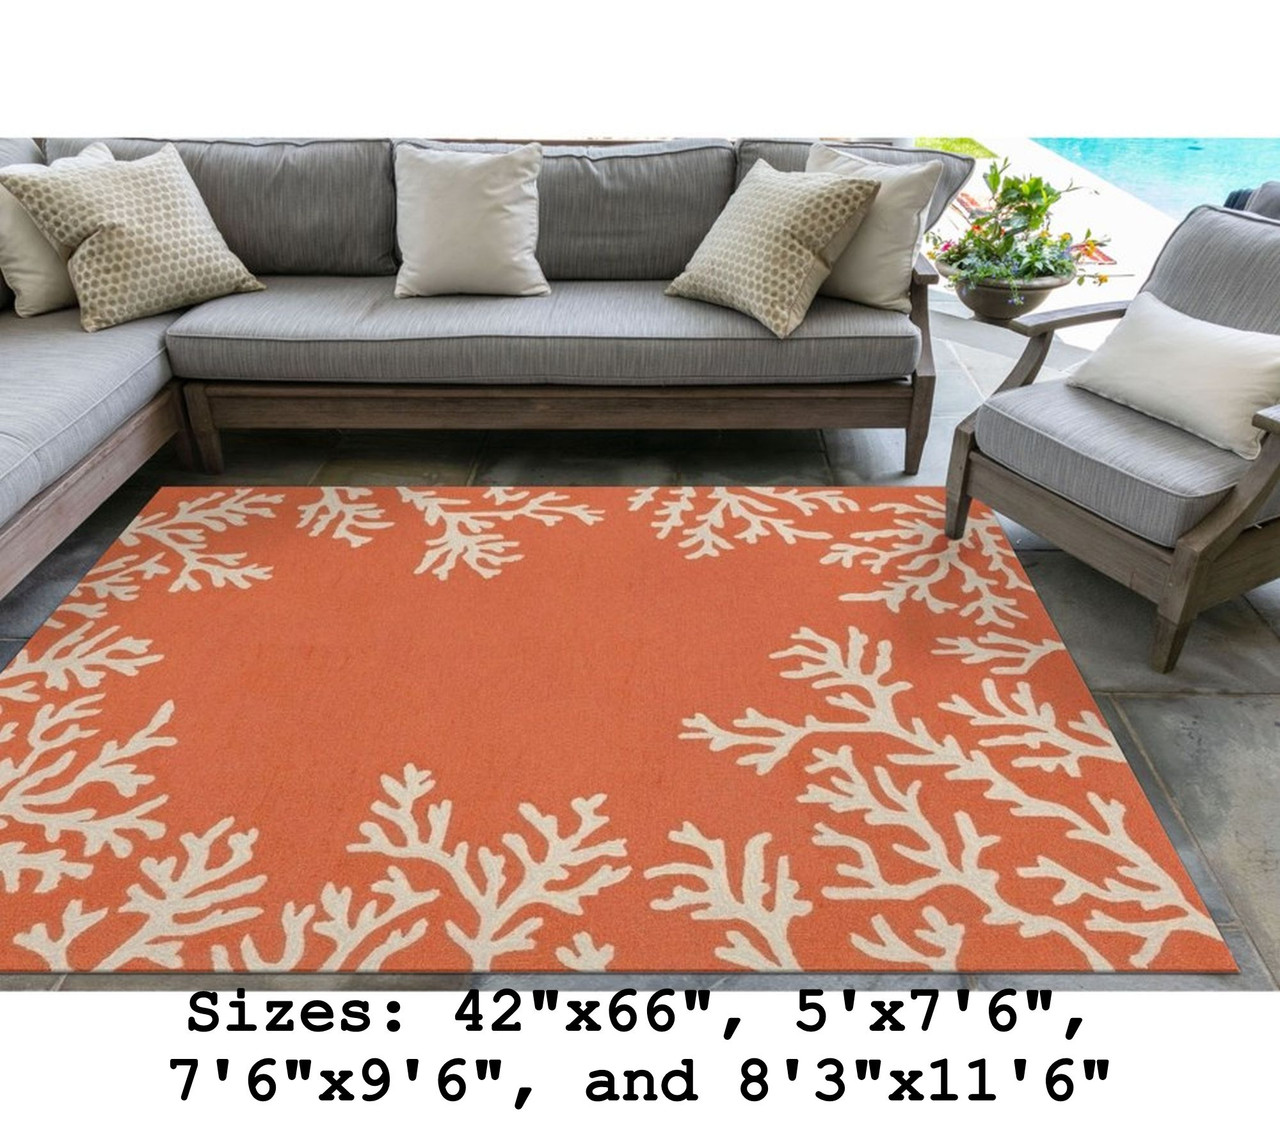 Capri Coral Border Indoor/Outdoor Rug -  Coral - Large Rectangle Lifestyle
Available in 11 Sizes